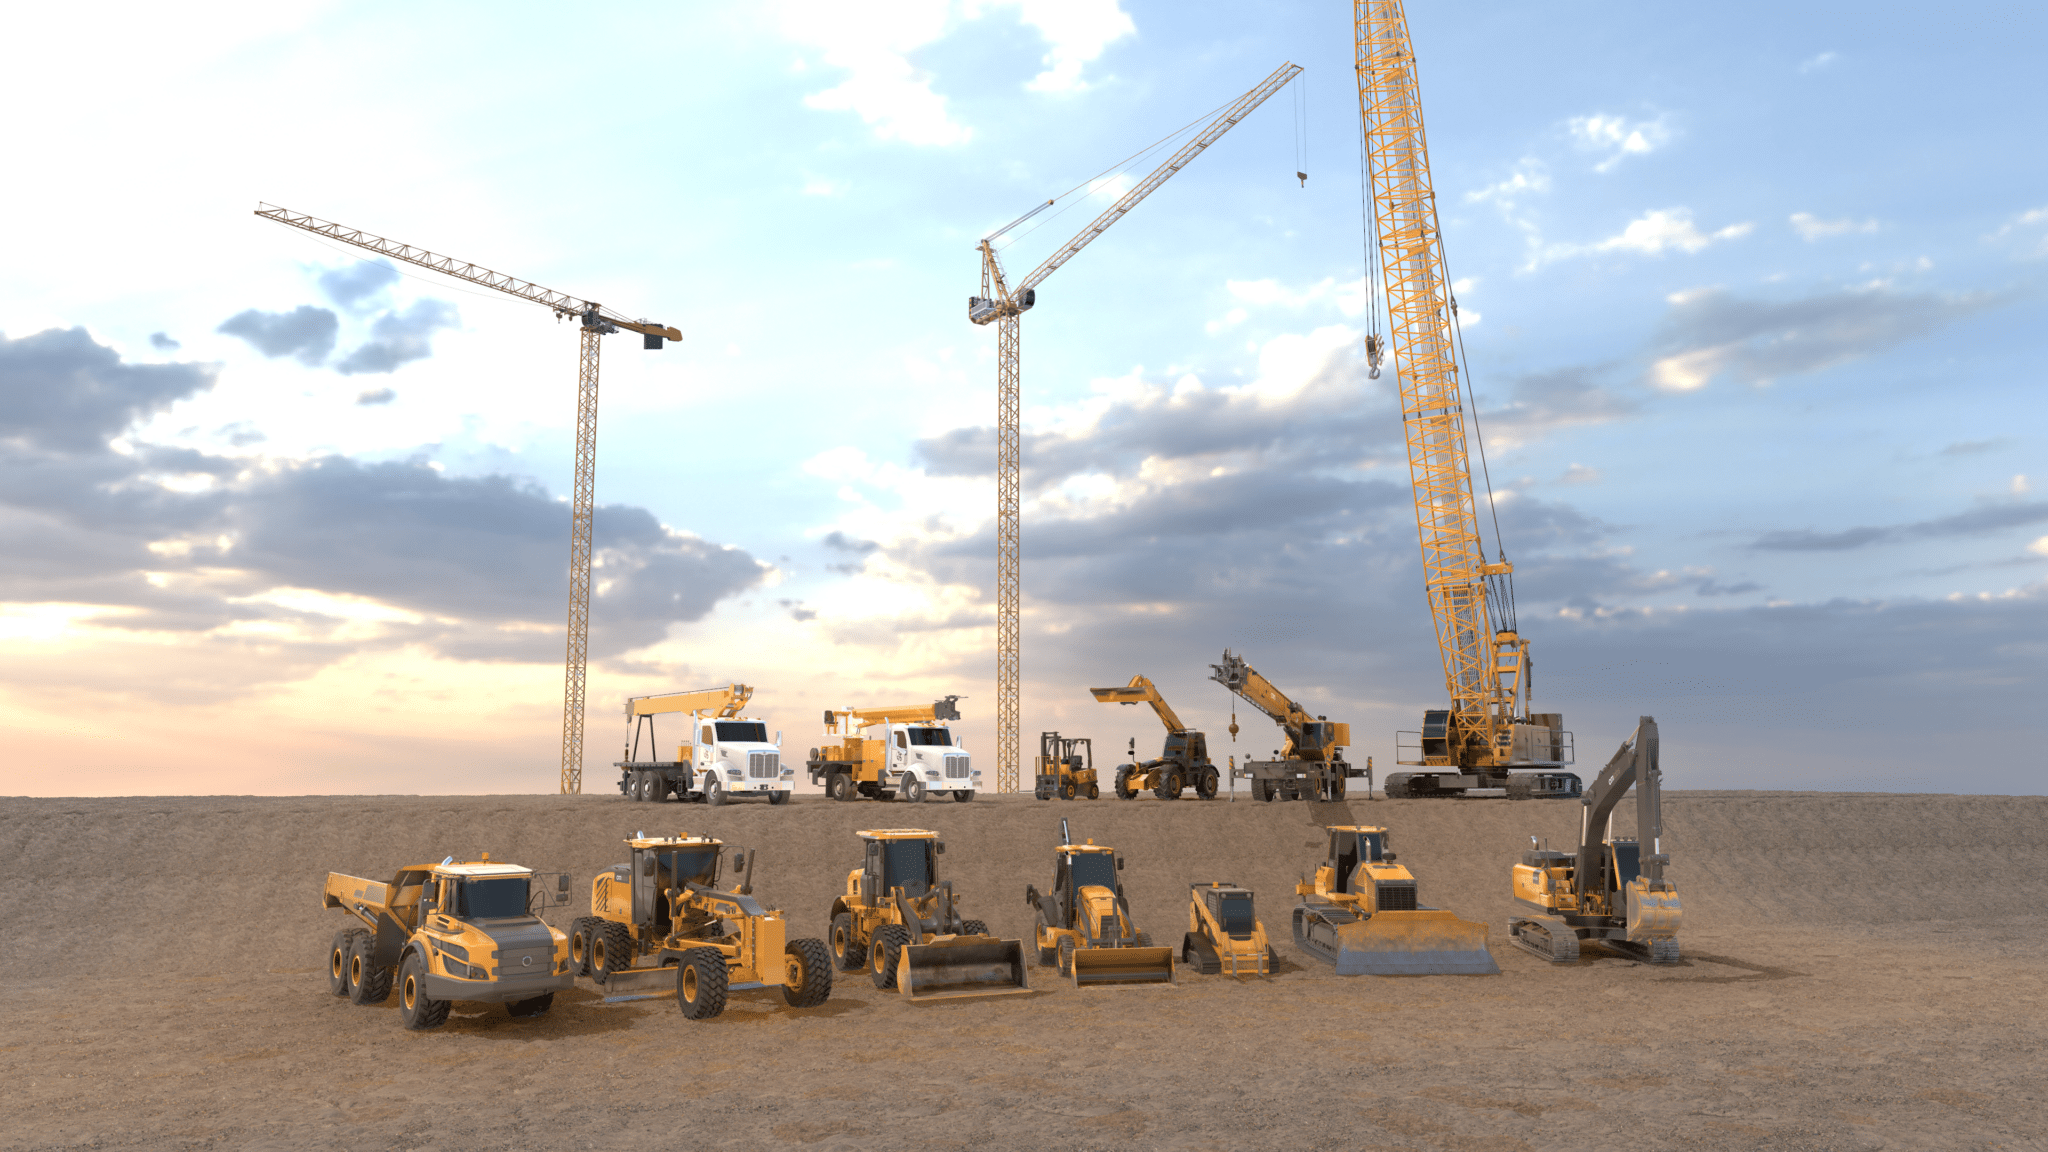 CM labs Simulations' Full Family of Construction Equipment